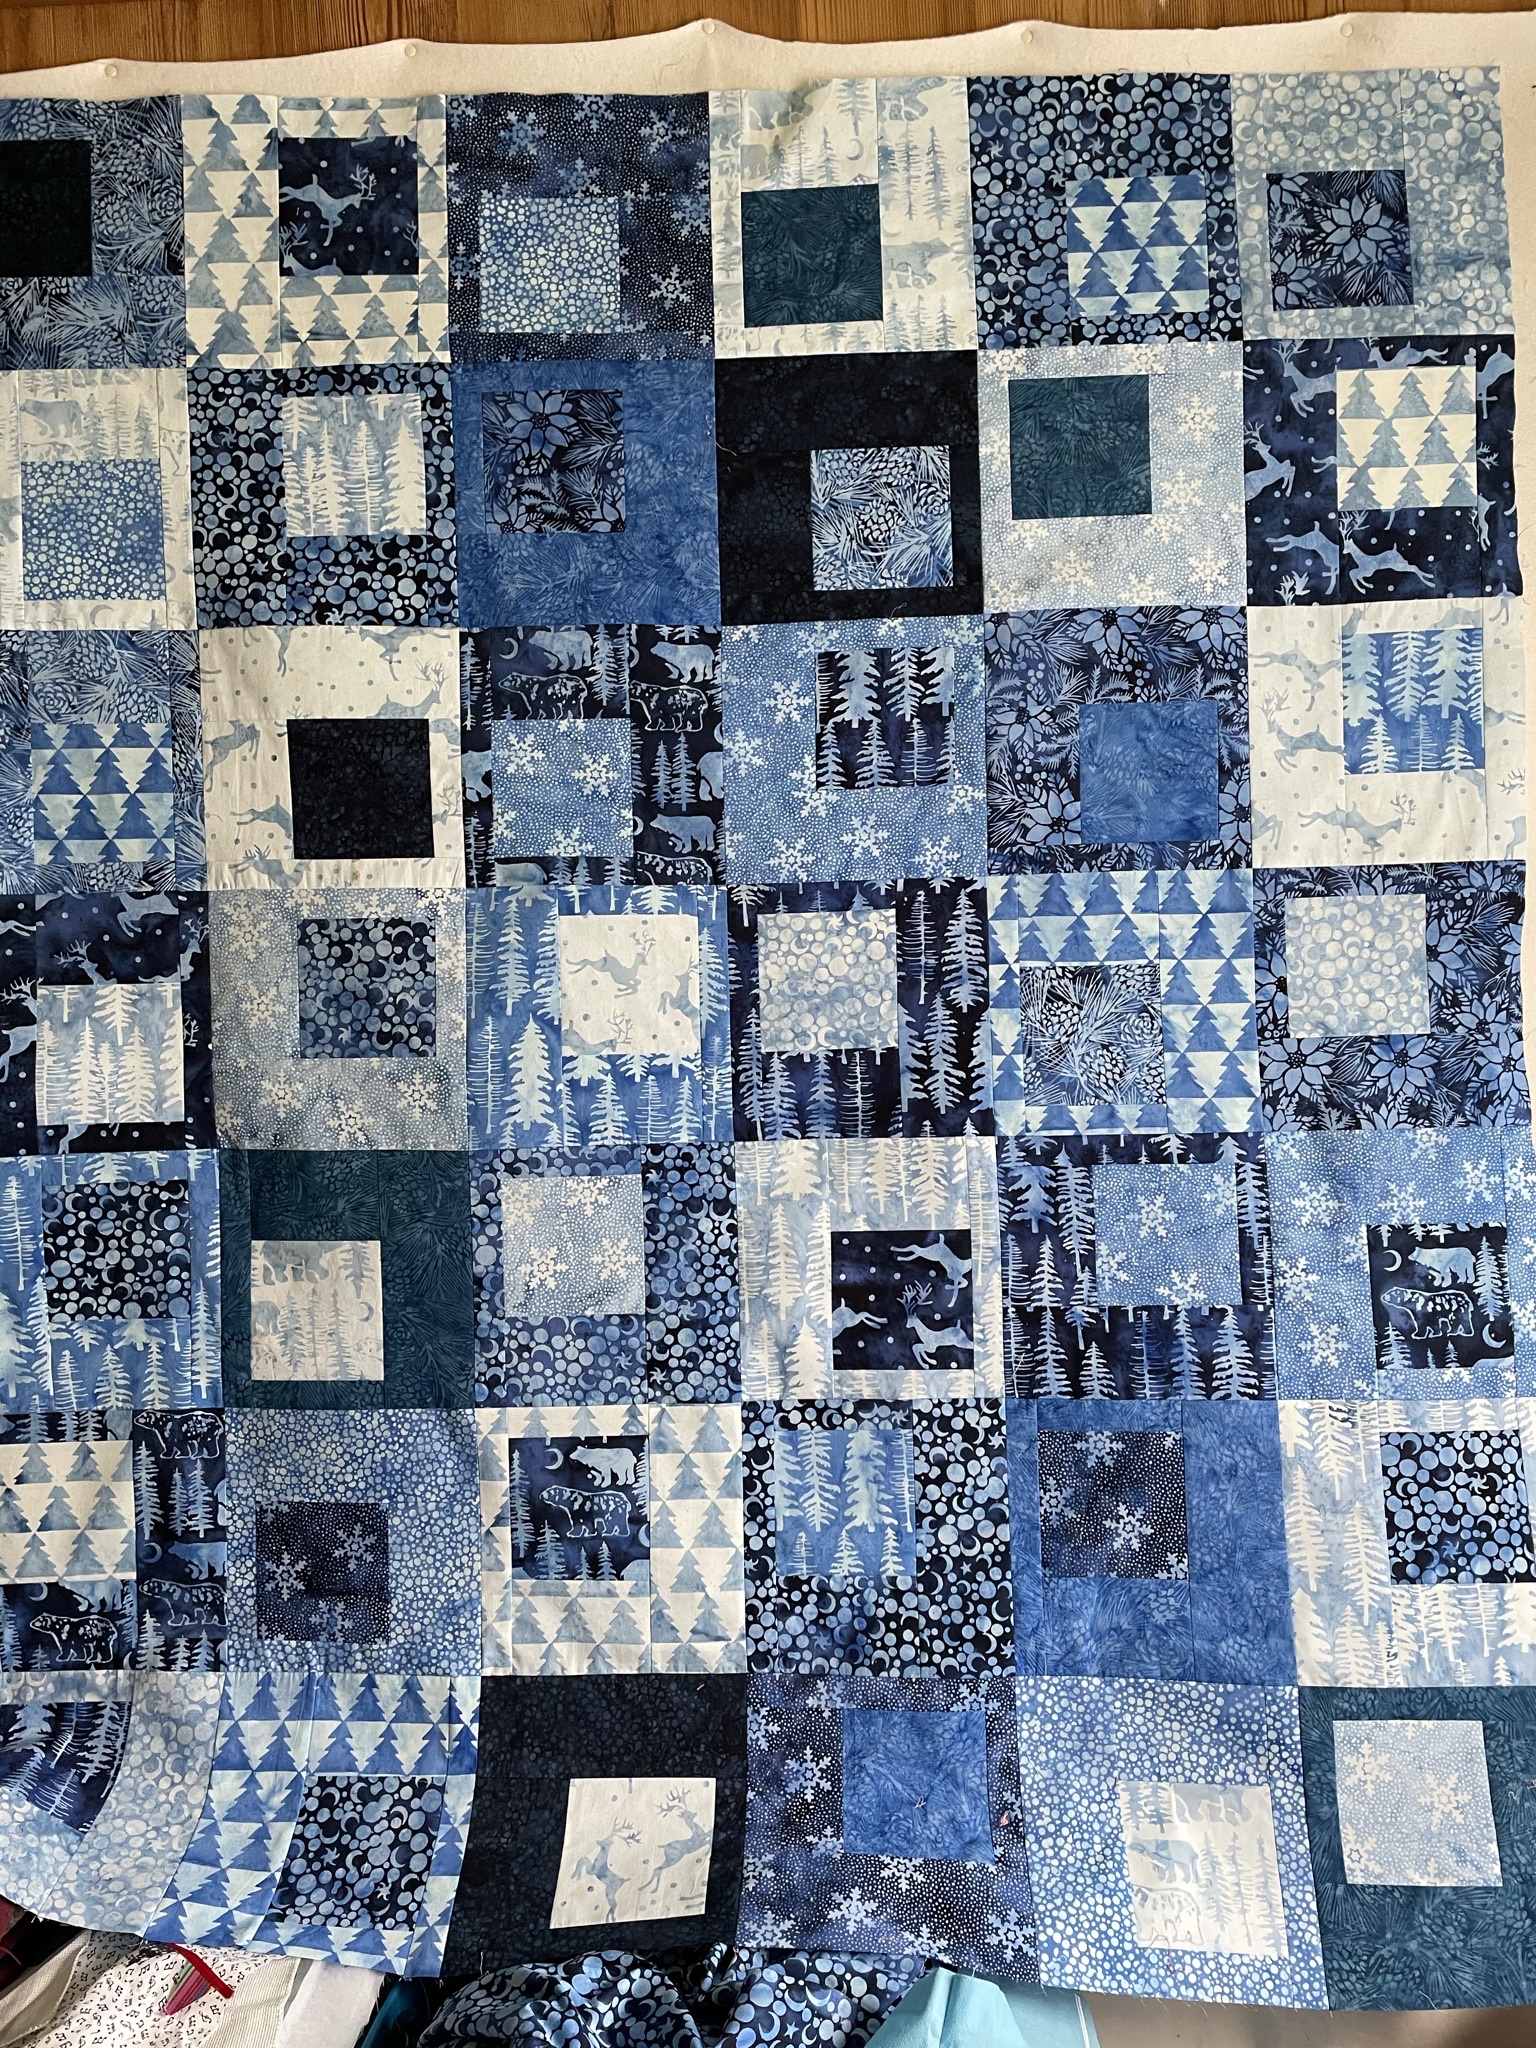 PamelaQuilts: Quilt Modern - Day 3, Glacier Bay and my project!